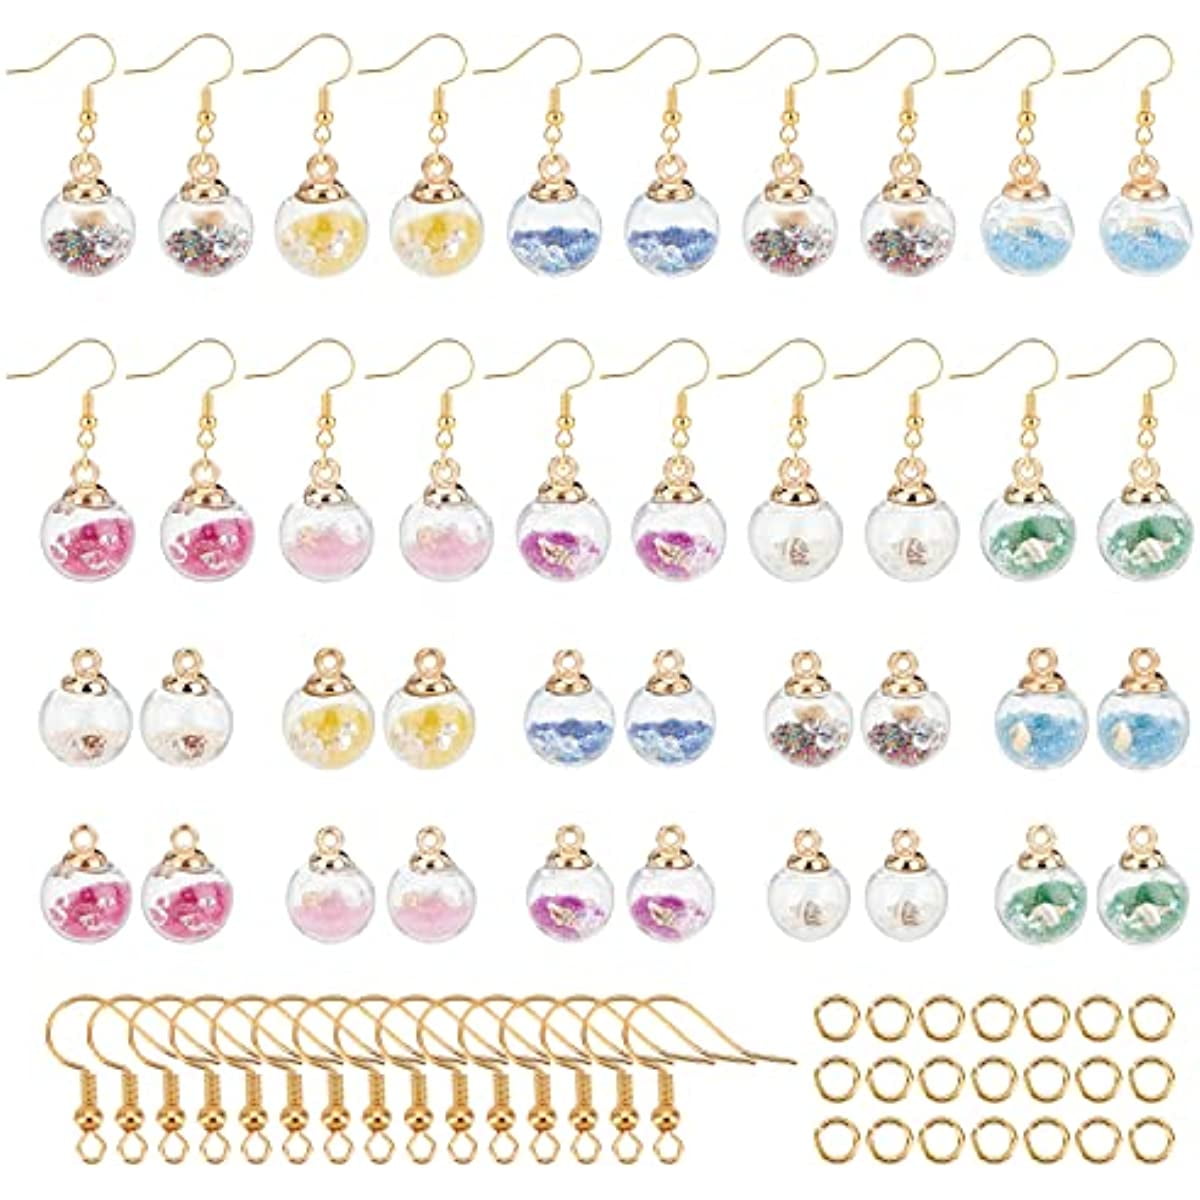 SUNNYCLUE 1 Box 40pcs 16mm Glass Ball Charms Crystal Glass Globe Earrings  with Shining Stars Earring Making Starter Kit for Earring Necklace Making